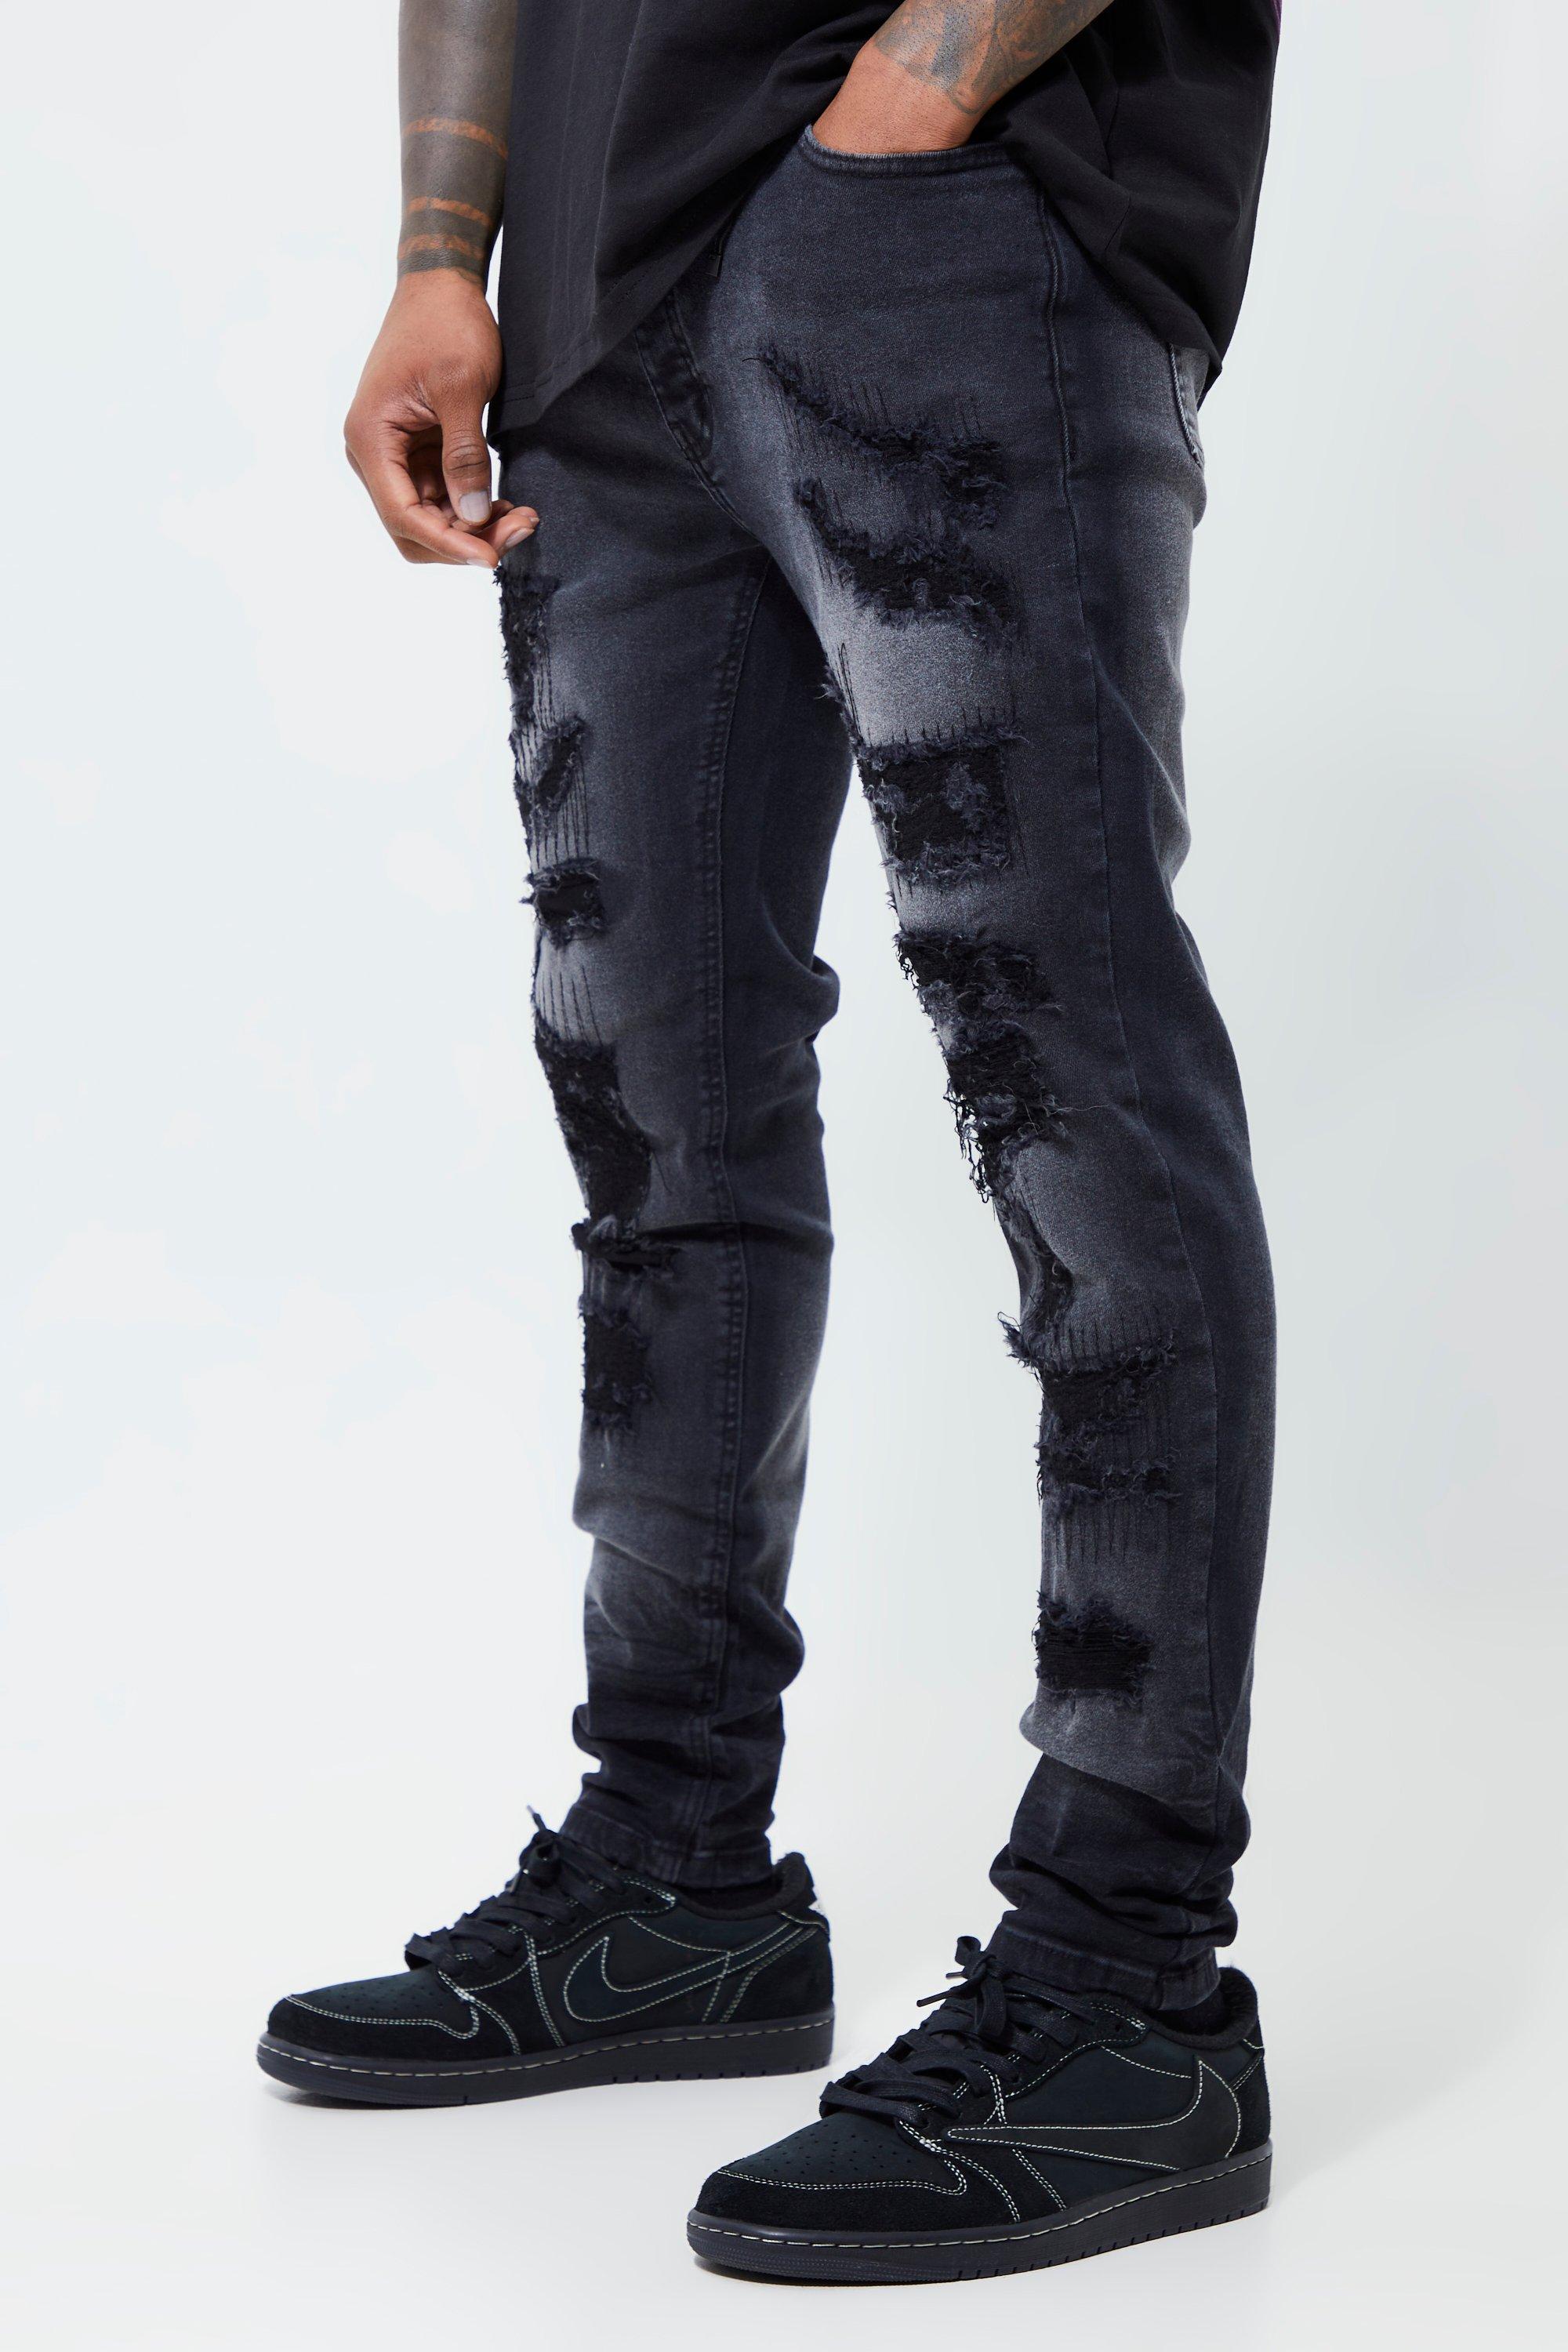 Overleve Inspirere mode Skinny Stretch All Over Ripped Jeans | boohooMAN USA